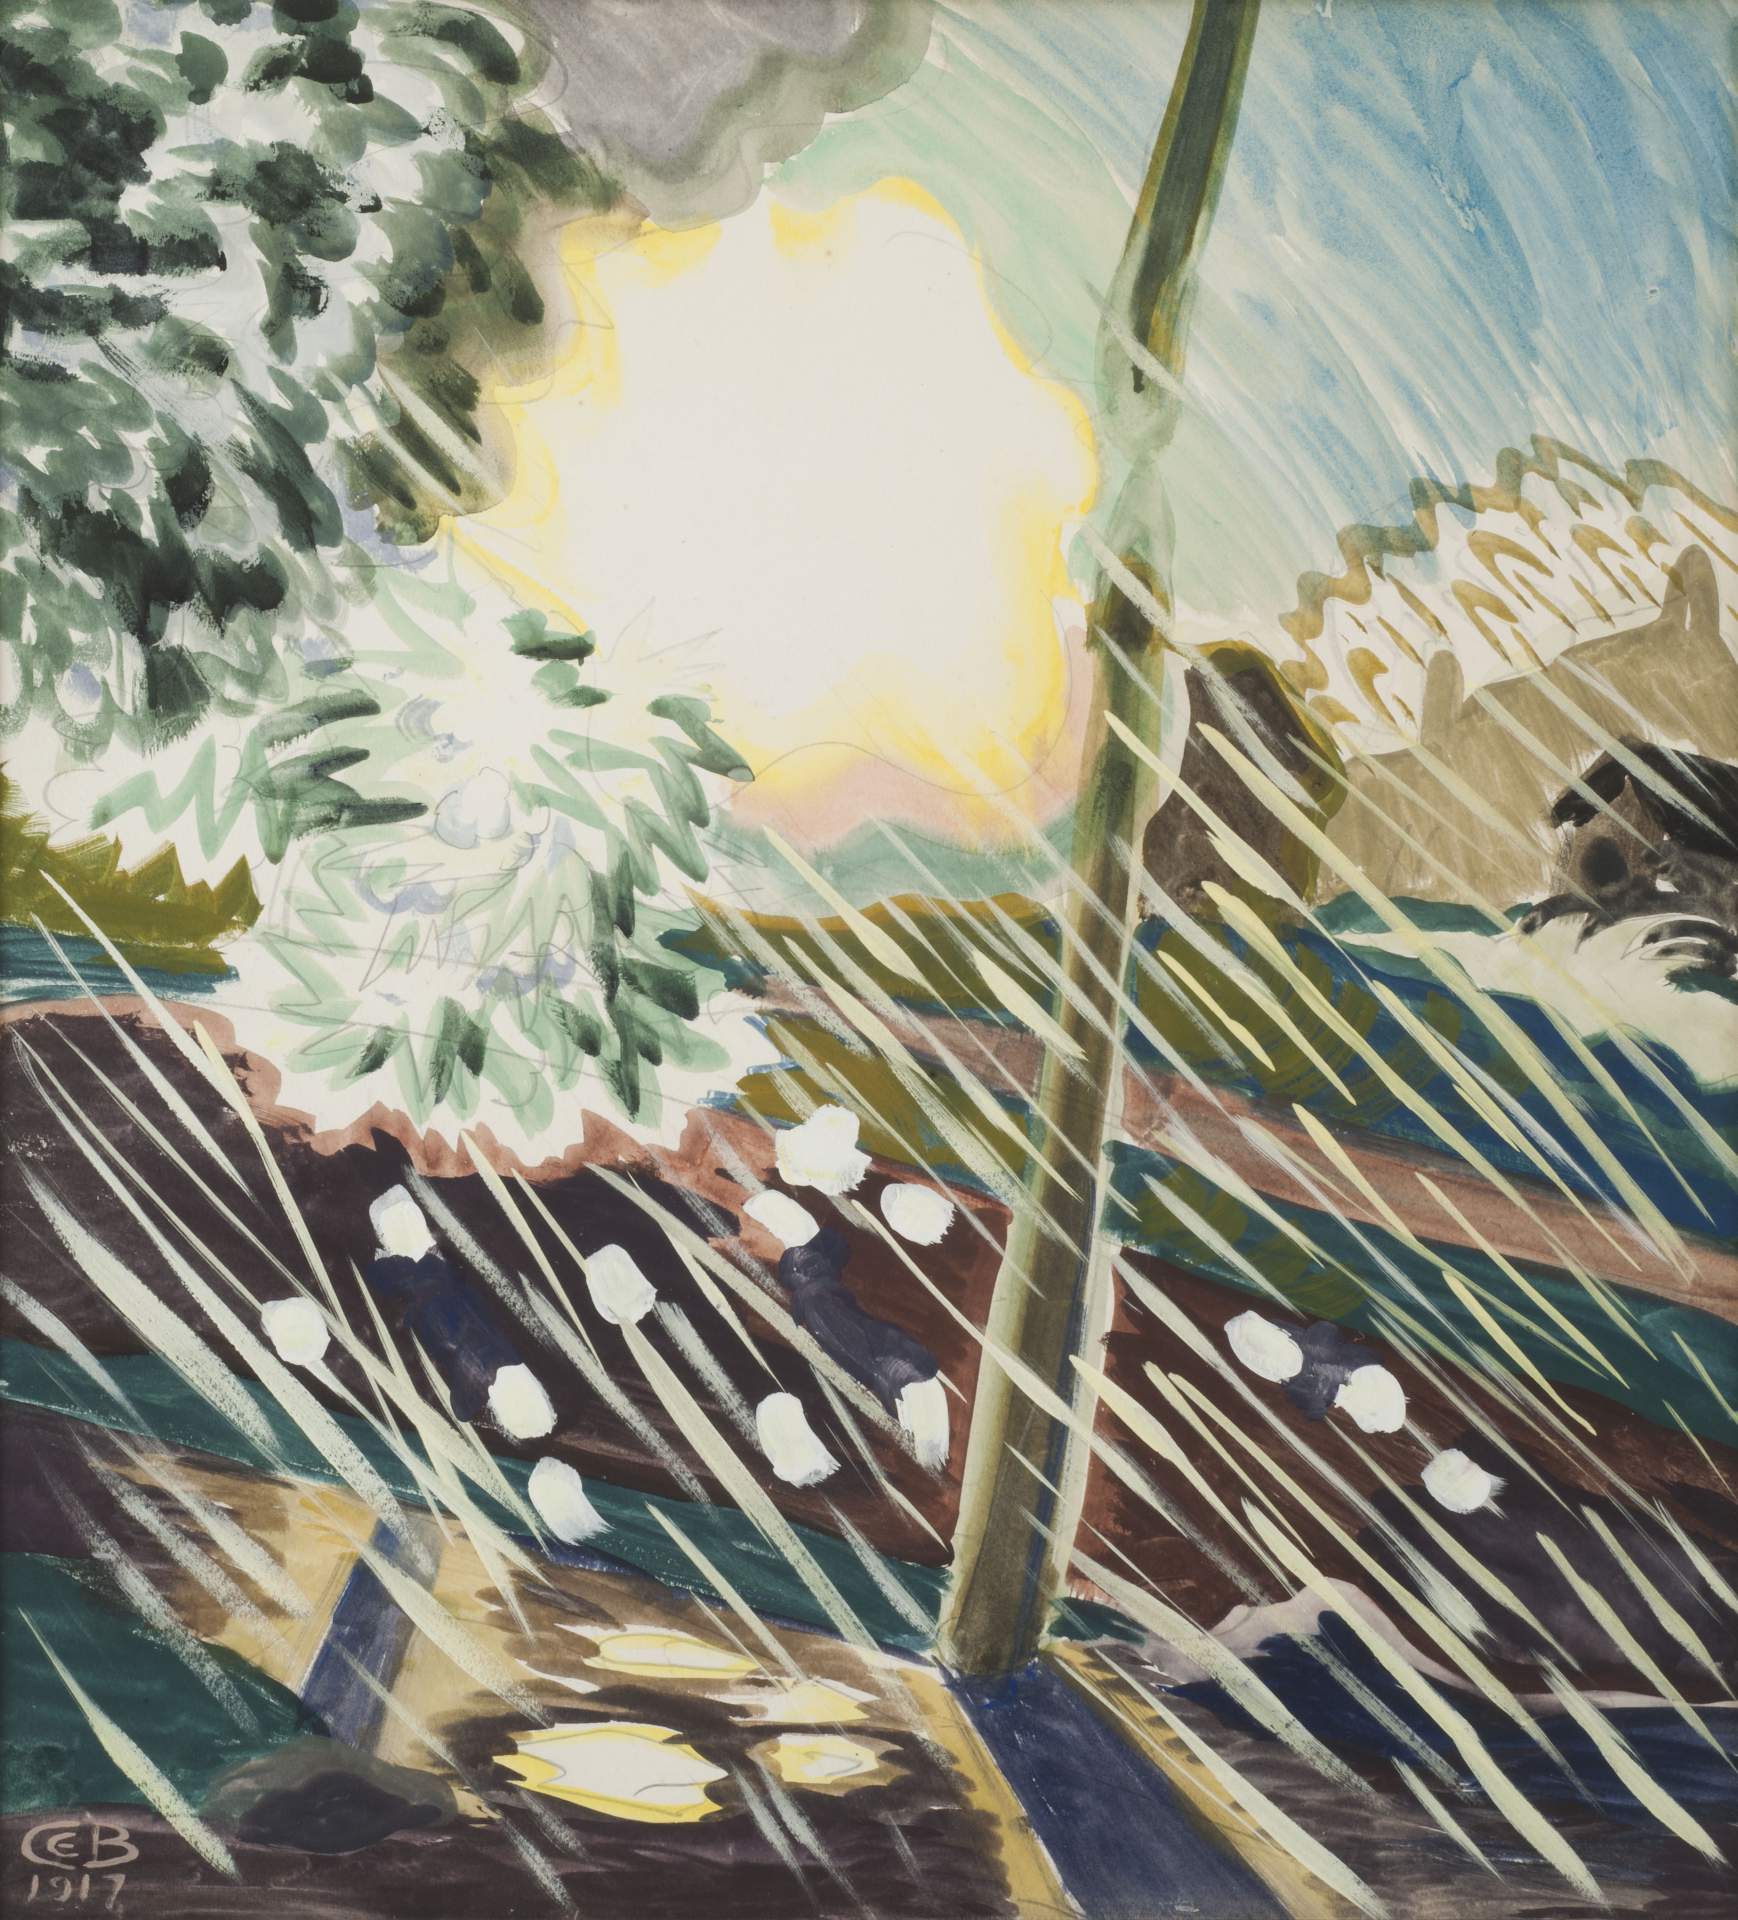 From Charles Burchfield's Journals, January 4, 1936